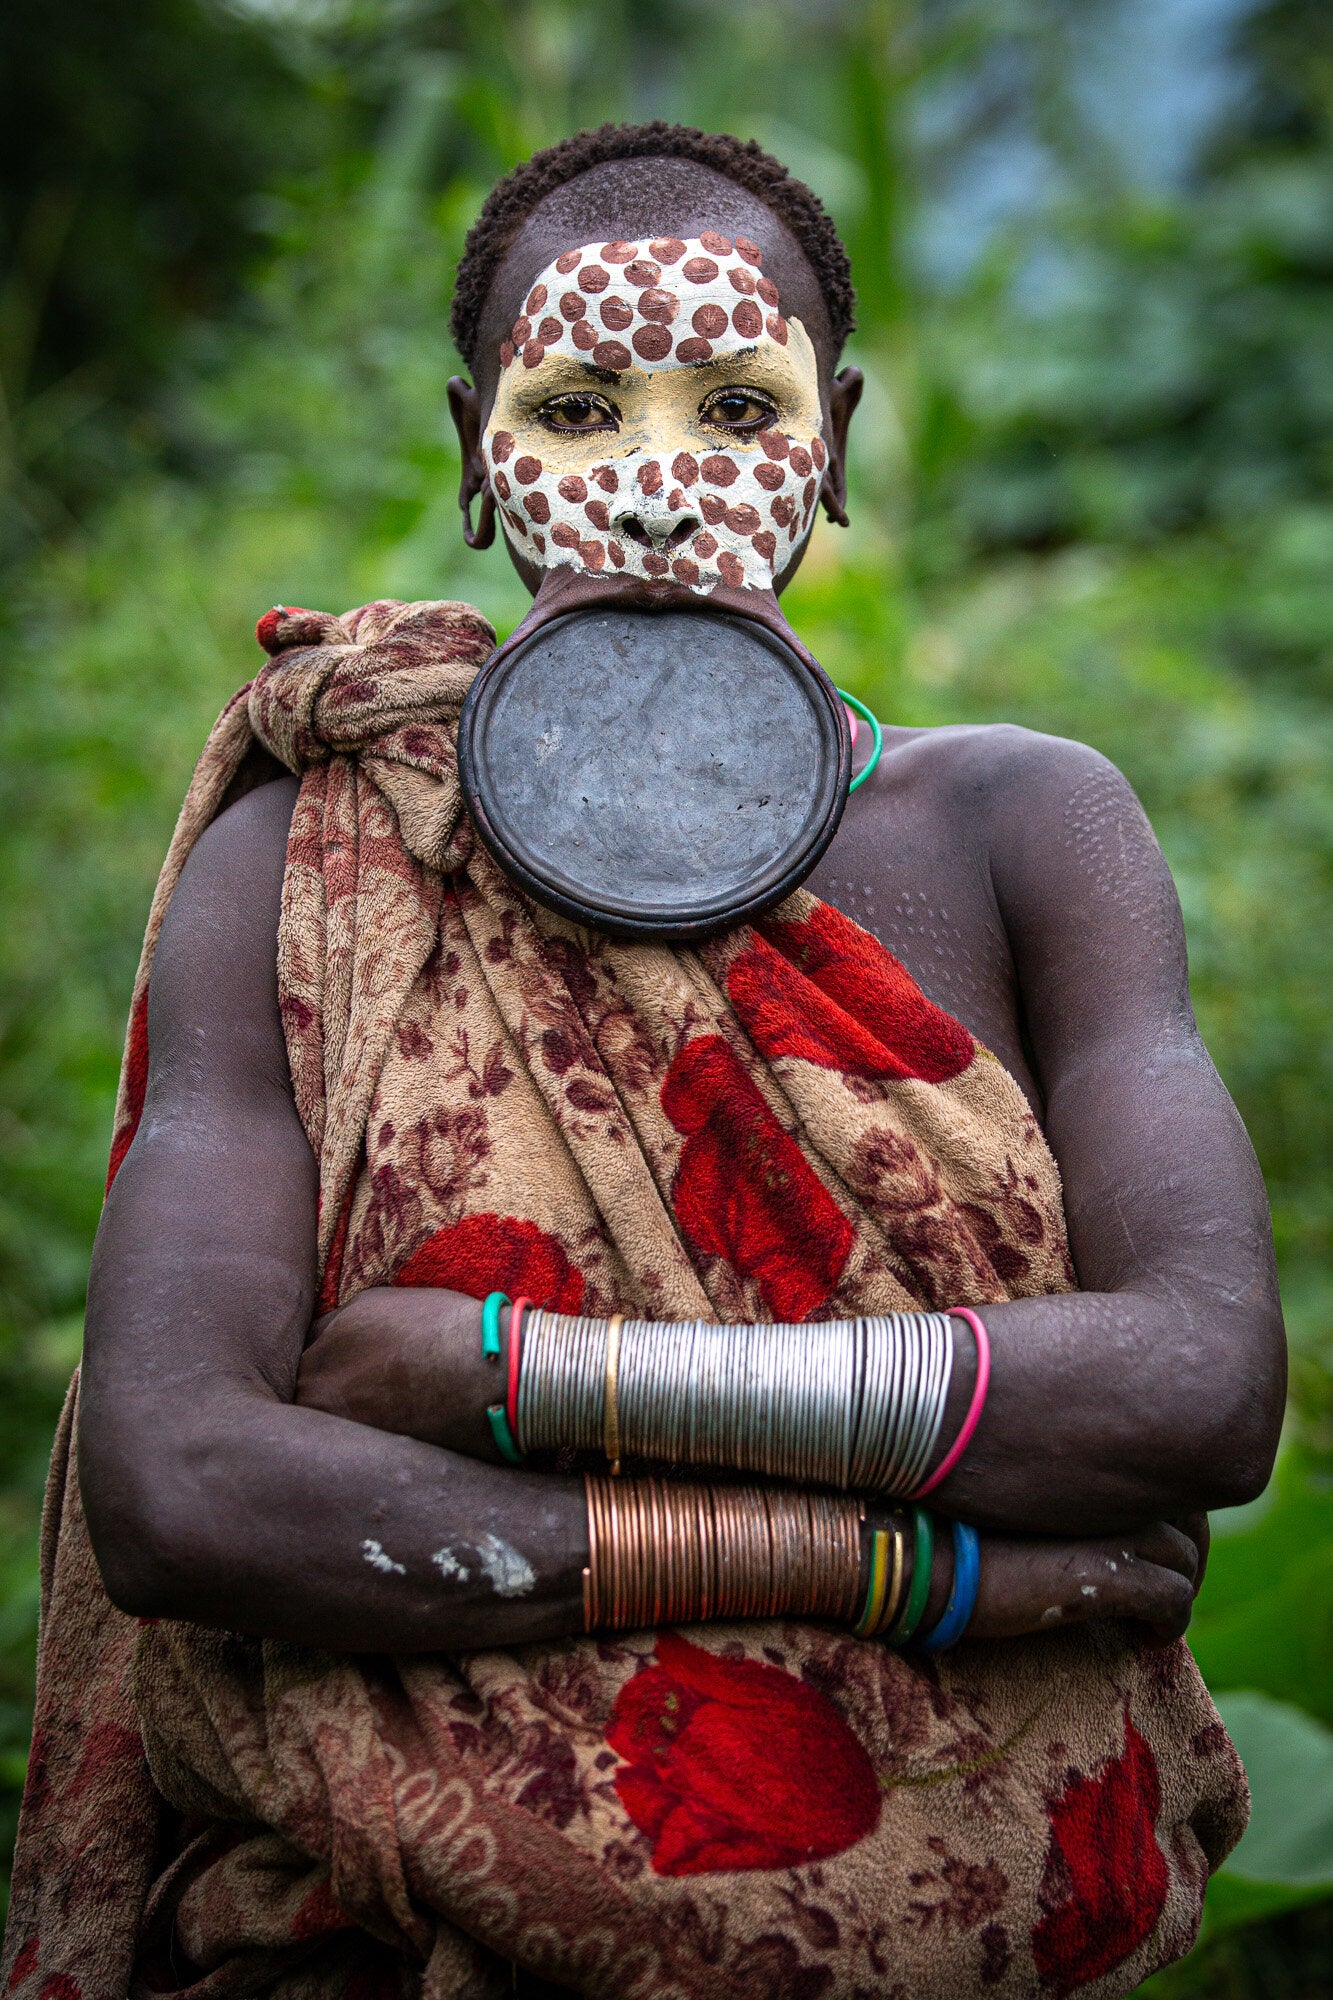 Beyond Beauty and Pain: The Mursi Lip Plate Tradition